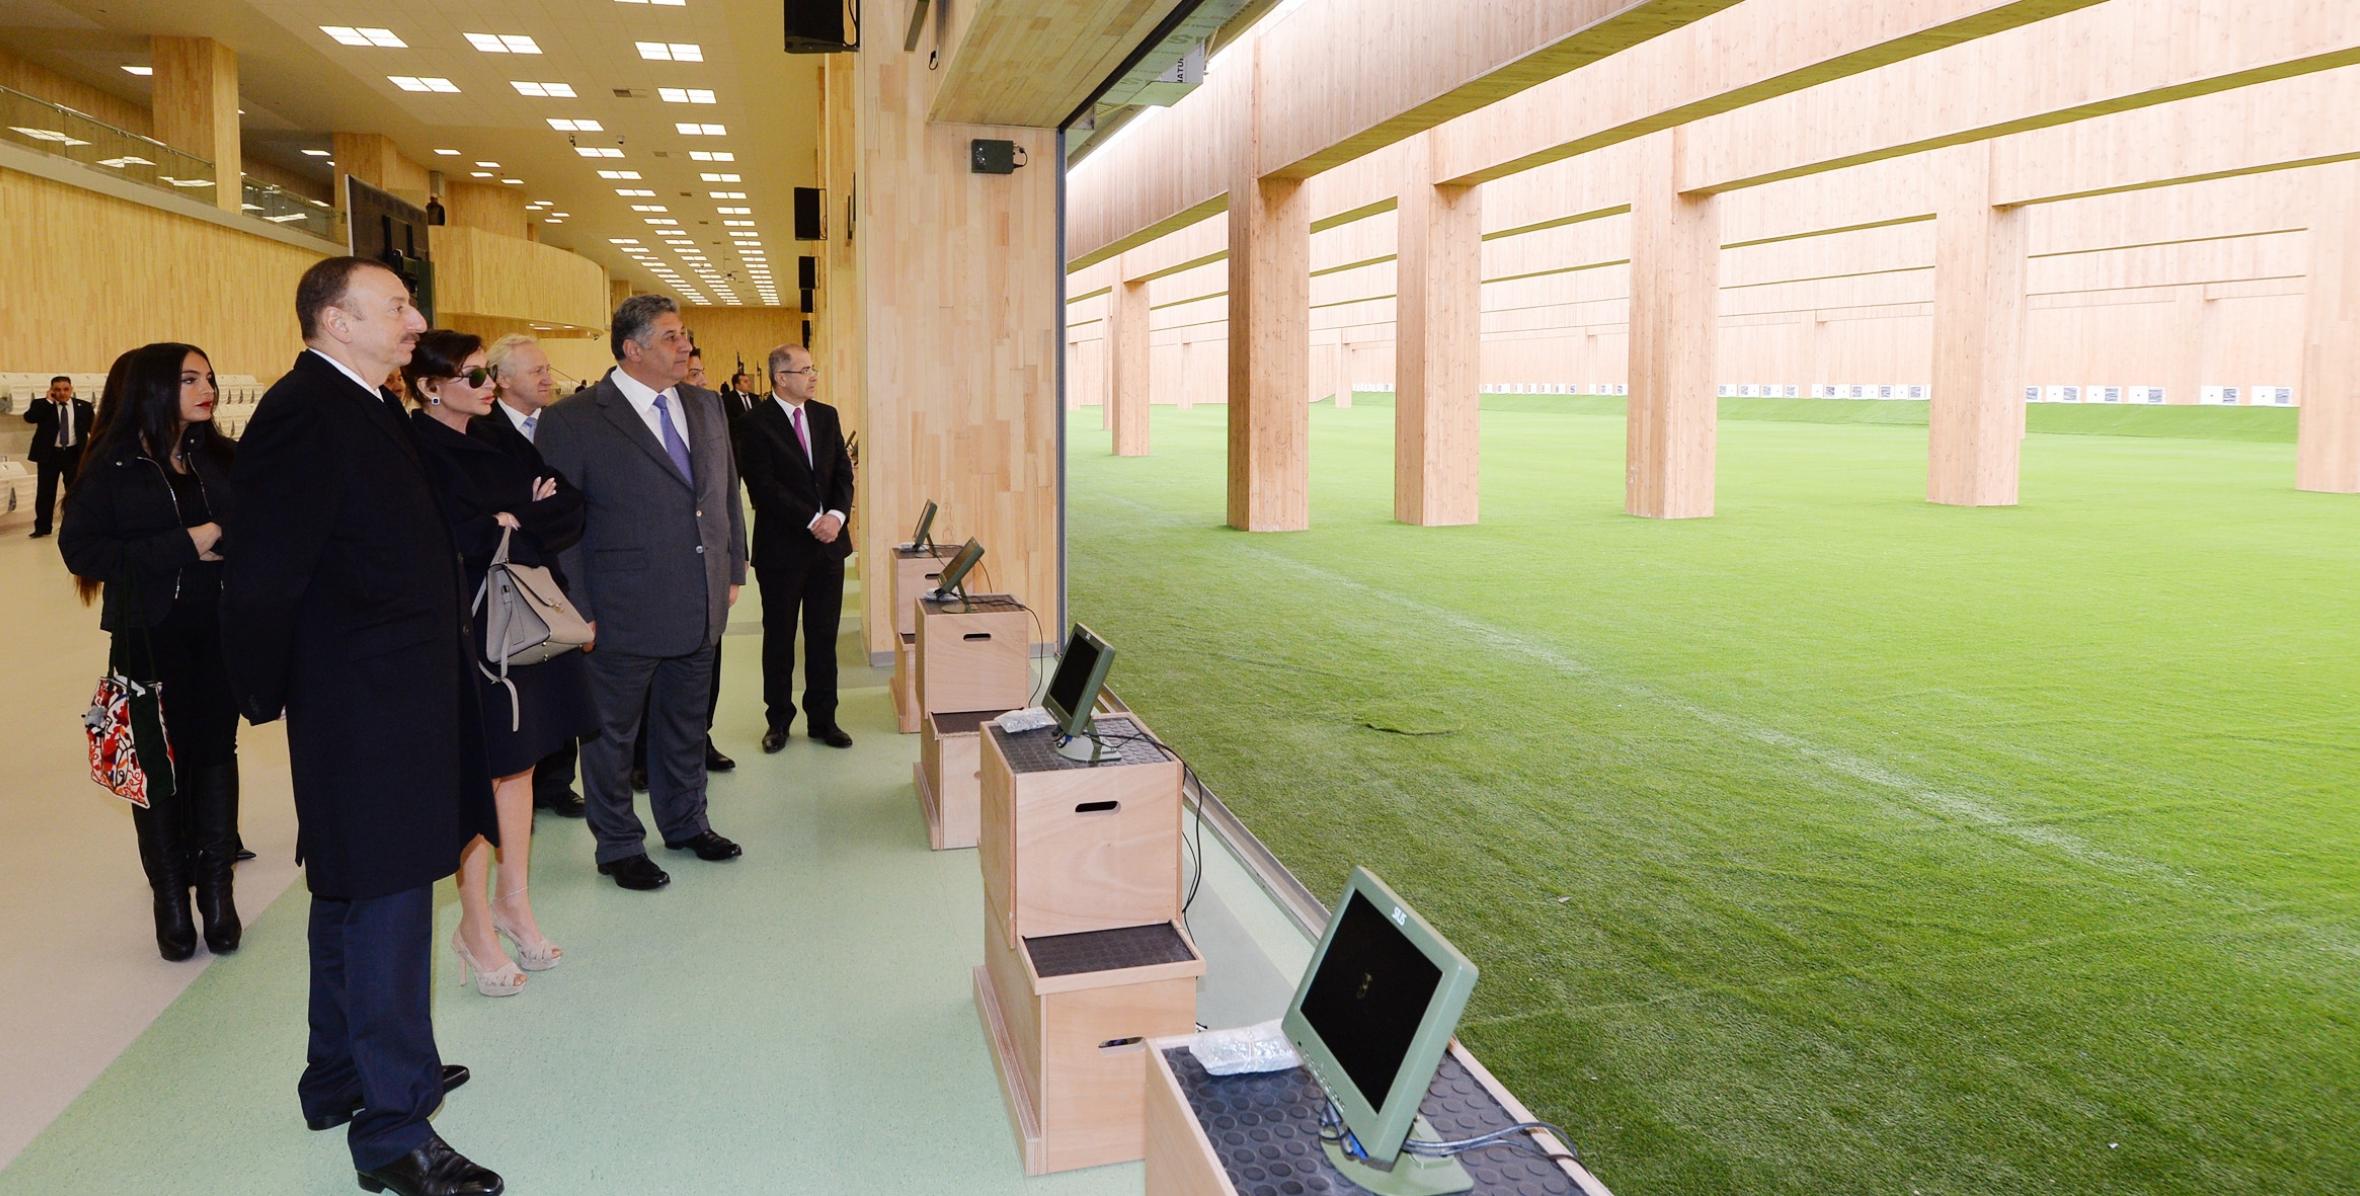 Ilham Aliyev attended the opening of the Baku Shooting Center